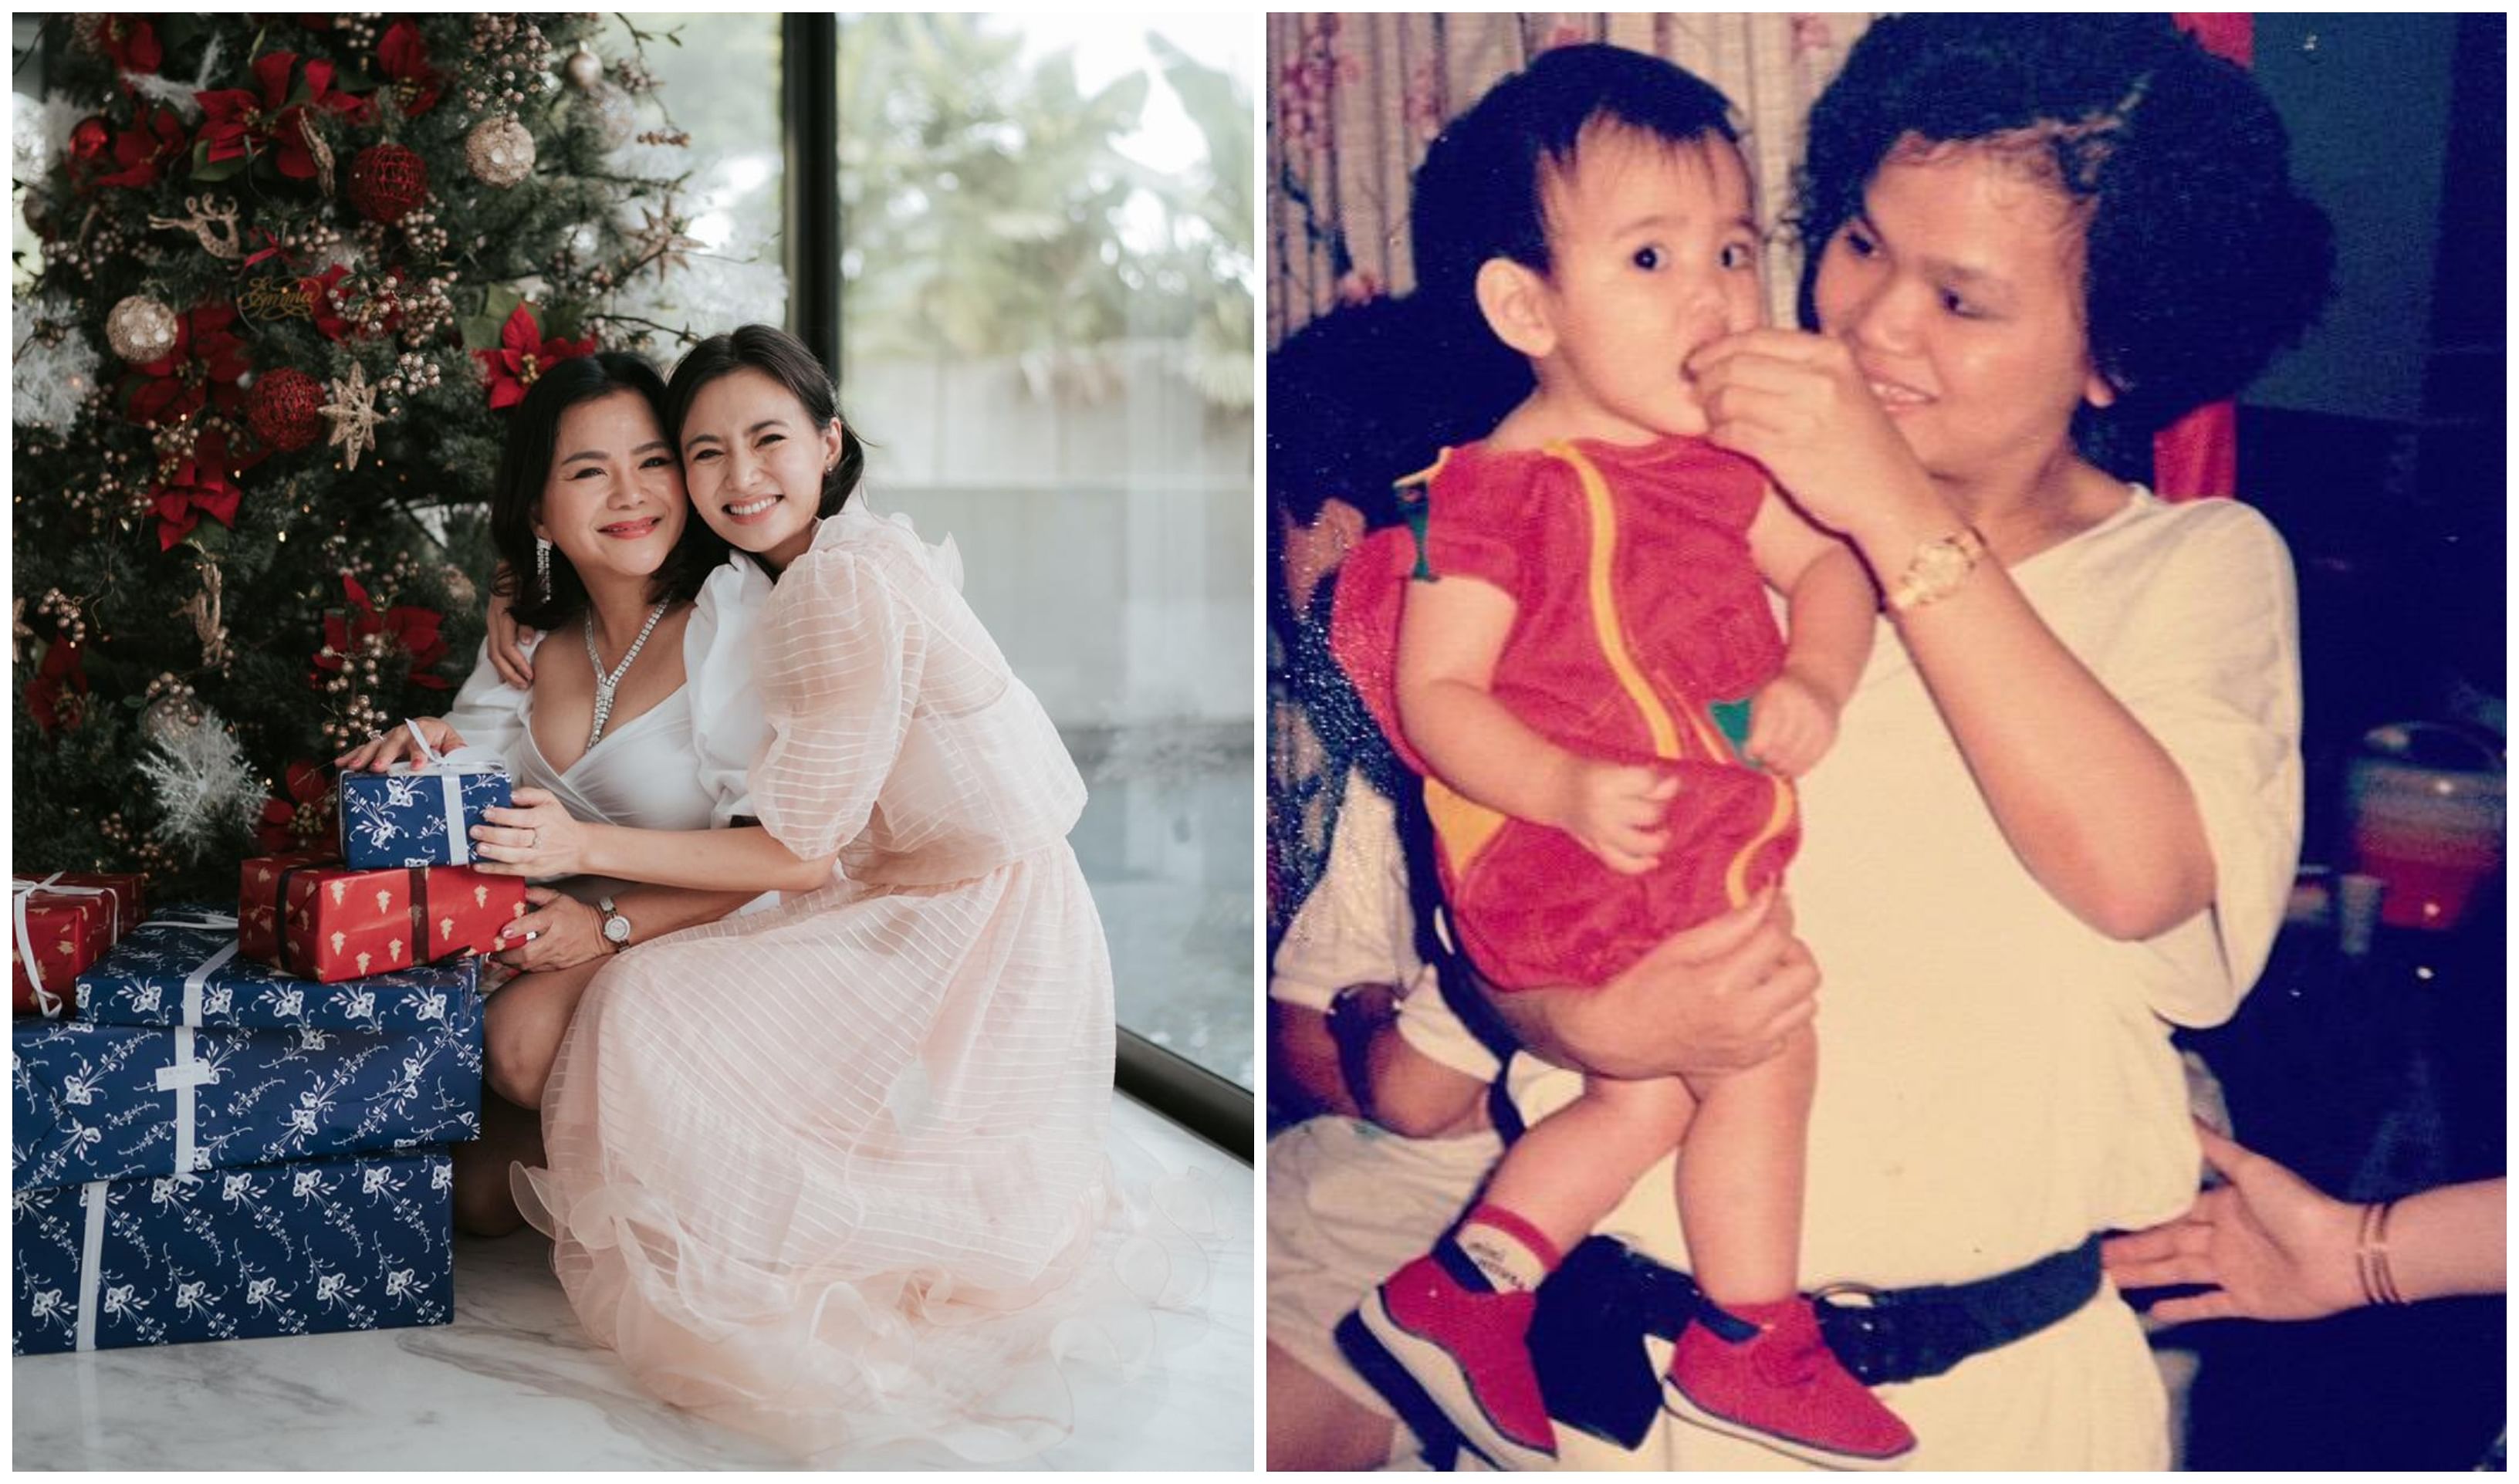 Cheryl Wee, Jean Yip, Rachel Wee, Mervin Wee, Mother's Day, Lifestyle, Childhood photos